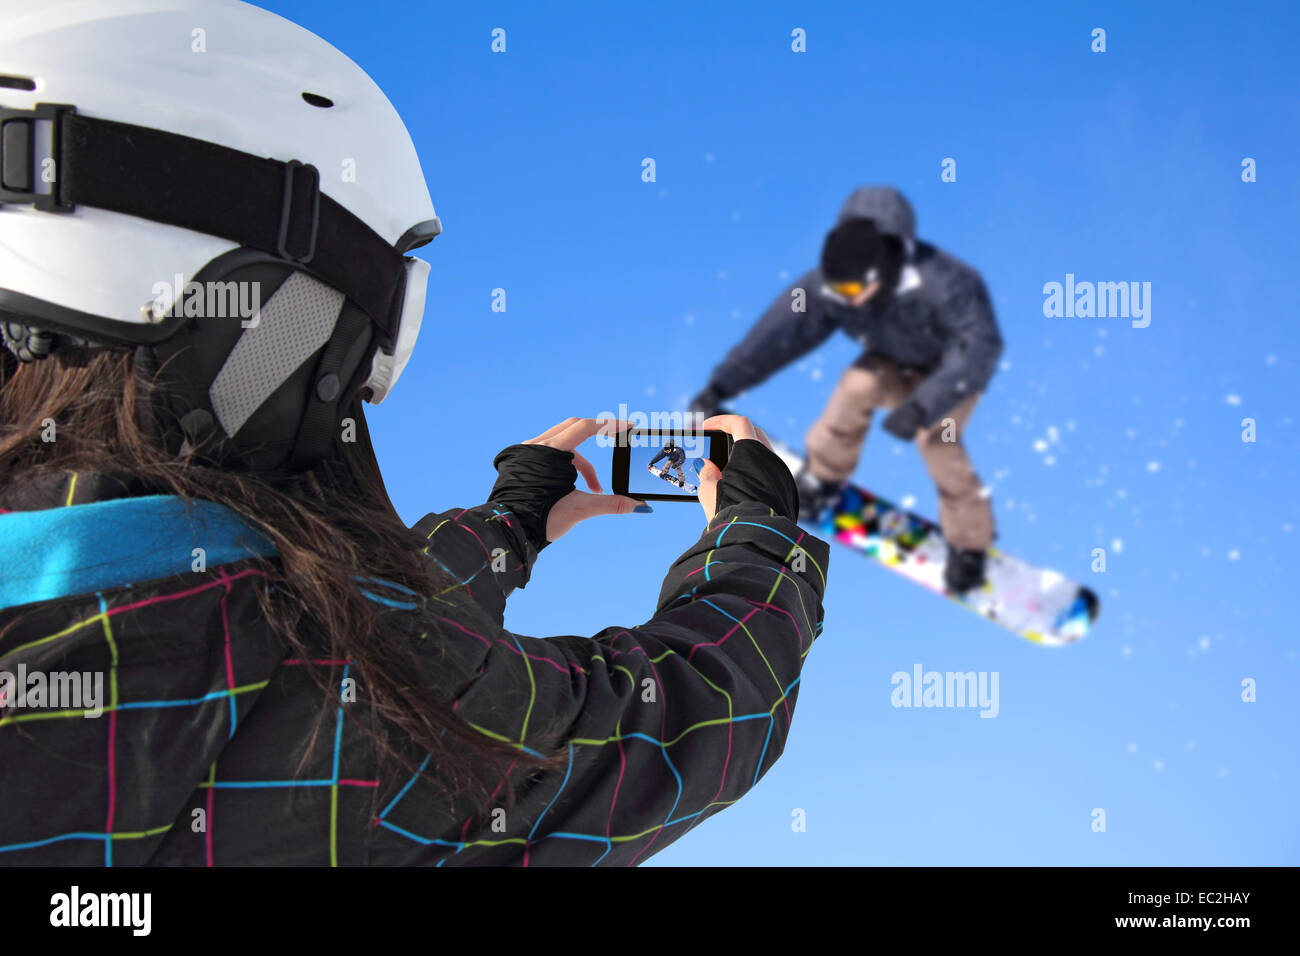 A young girl by mobile phone photographed of snowboarder jump Stock Photo